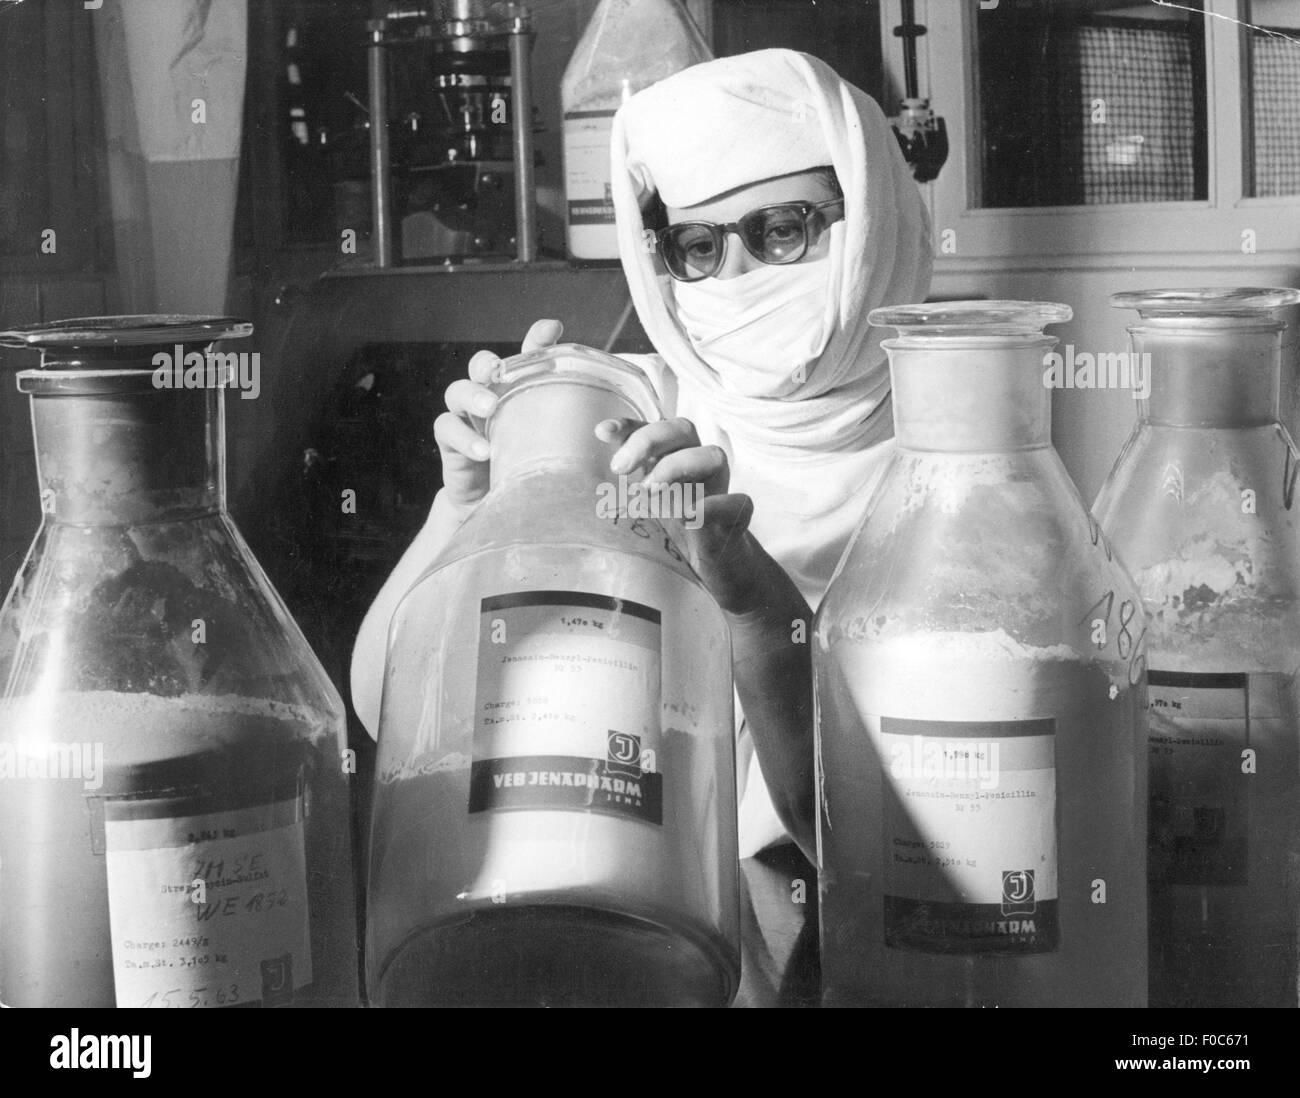 medicine, medicinal drug, penicillin, laboratory assistant checking a sample of the penicillin production, VEB Jenapharm, Jena, 1964, Additional-Rights-Clearences-Not Available Stock Photo